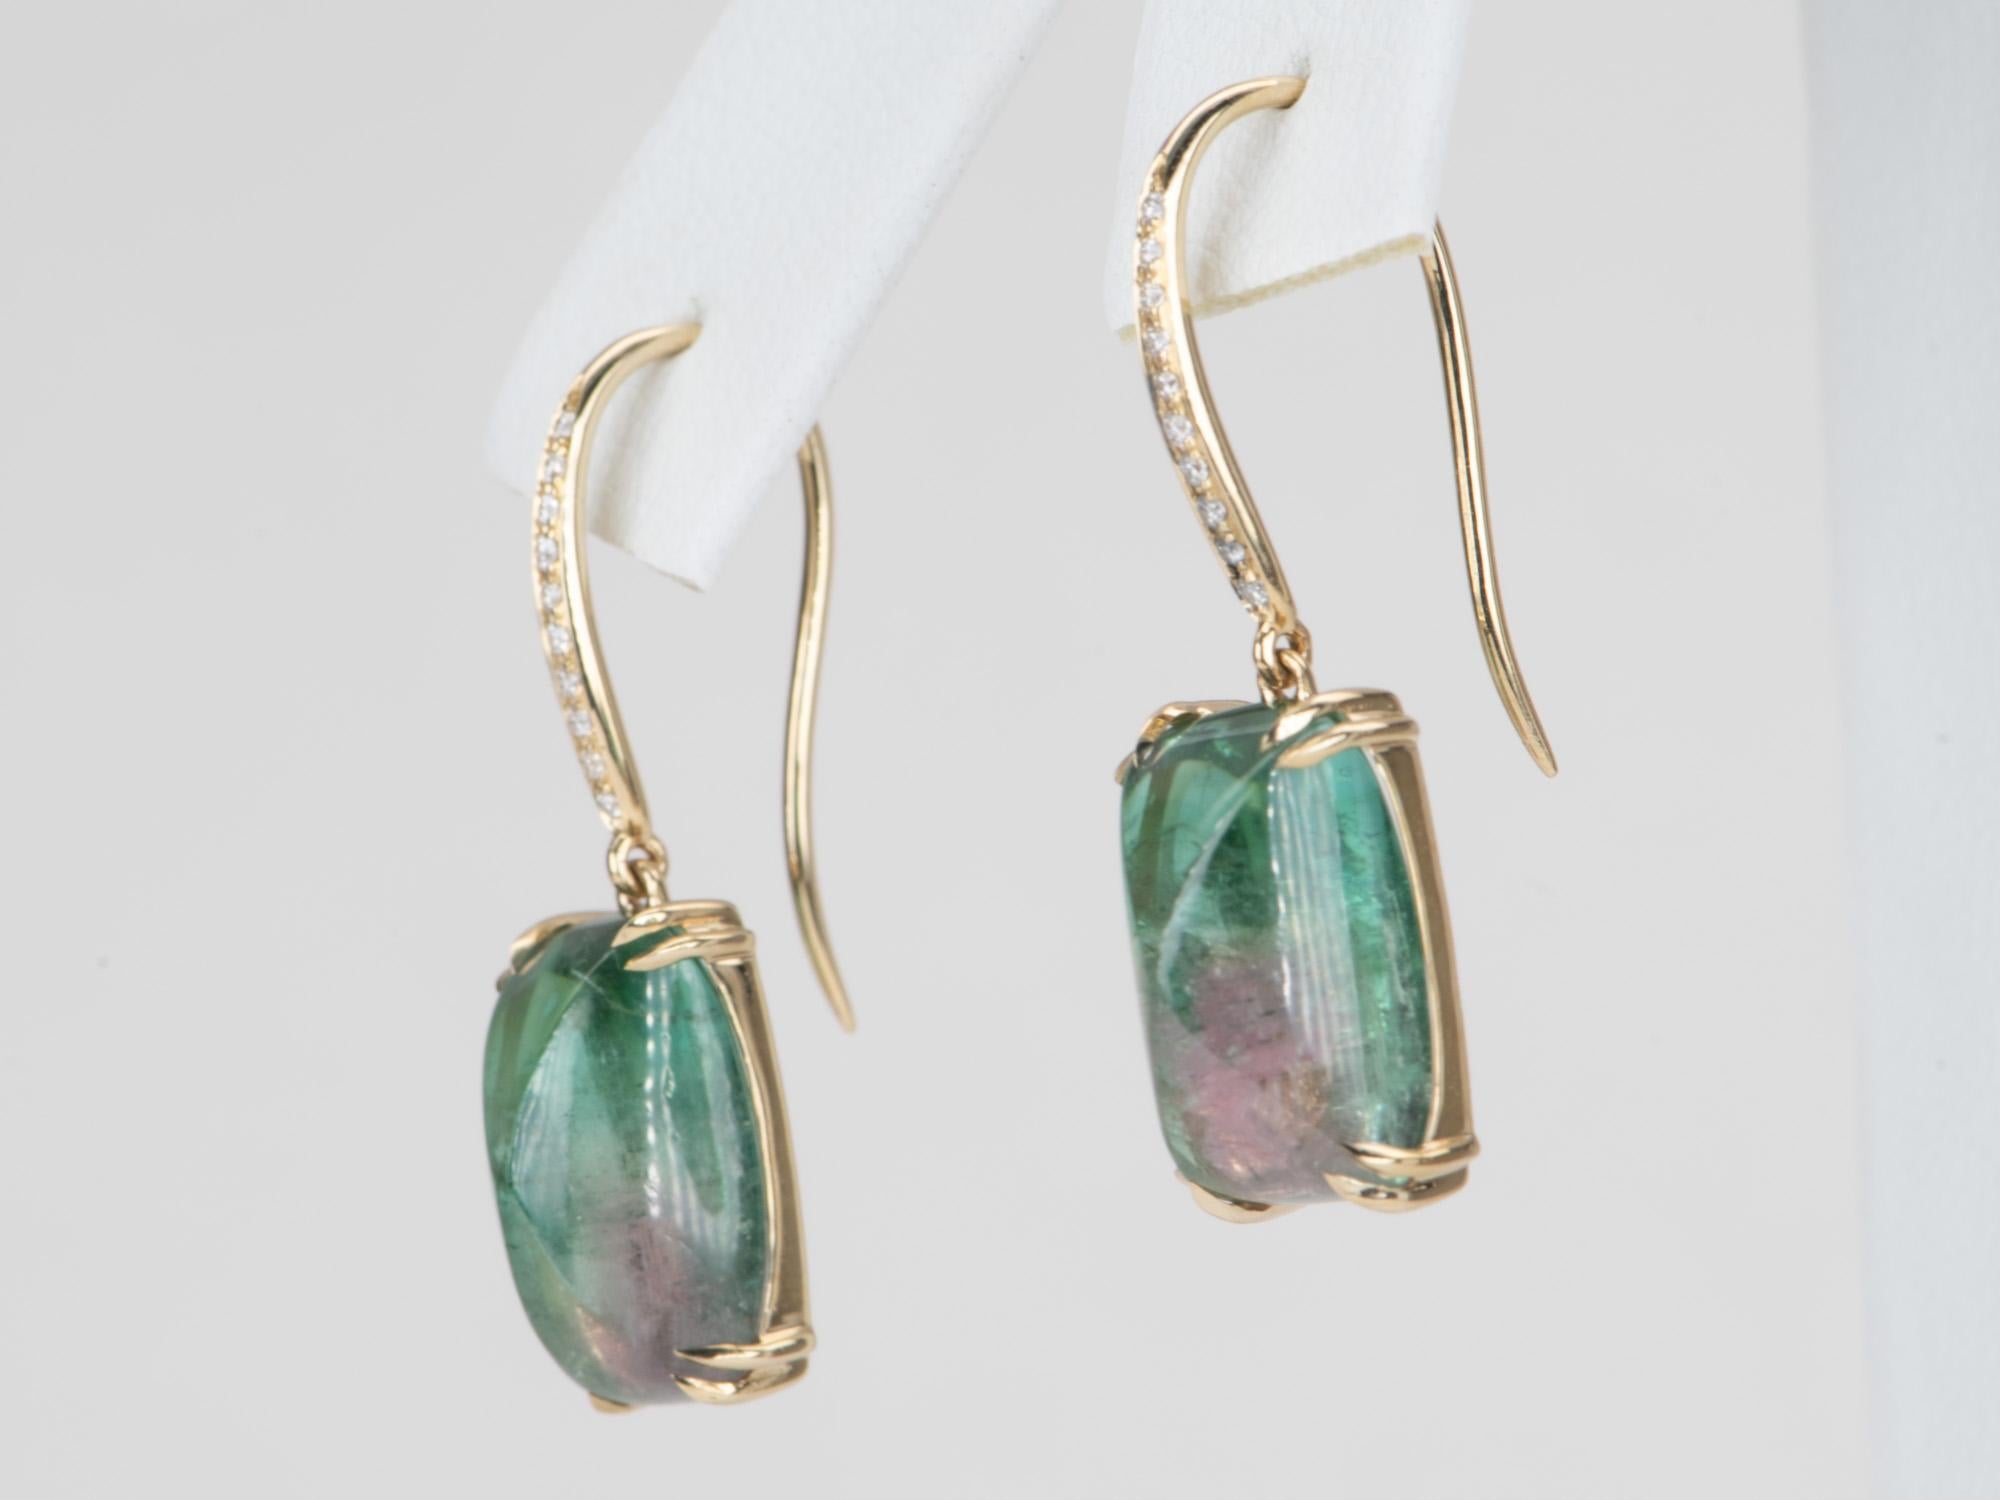 13.08ct Bi-Color Tourmaline Sugarloaf Dangle Earrings 14K Gold R3129 In New Condition For Sale In Osprey, FL